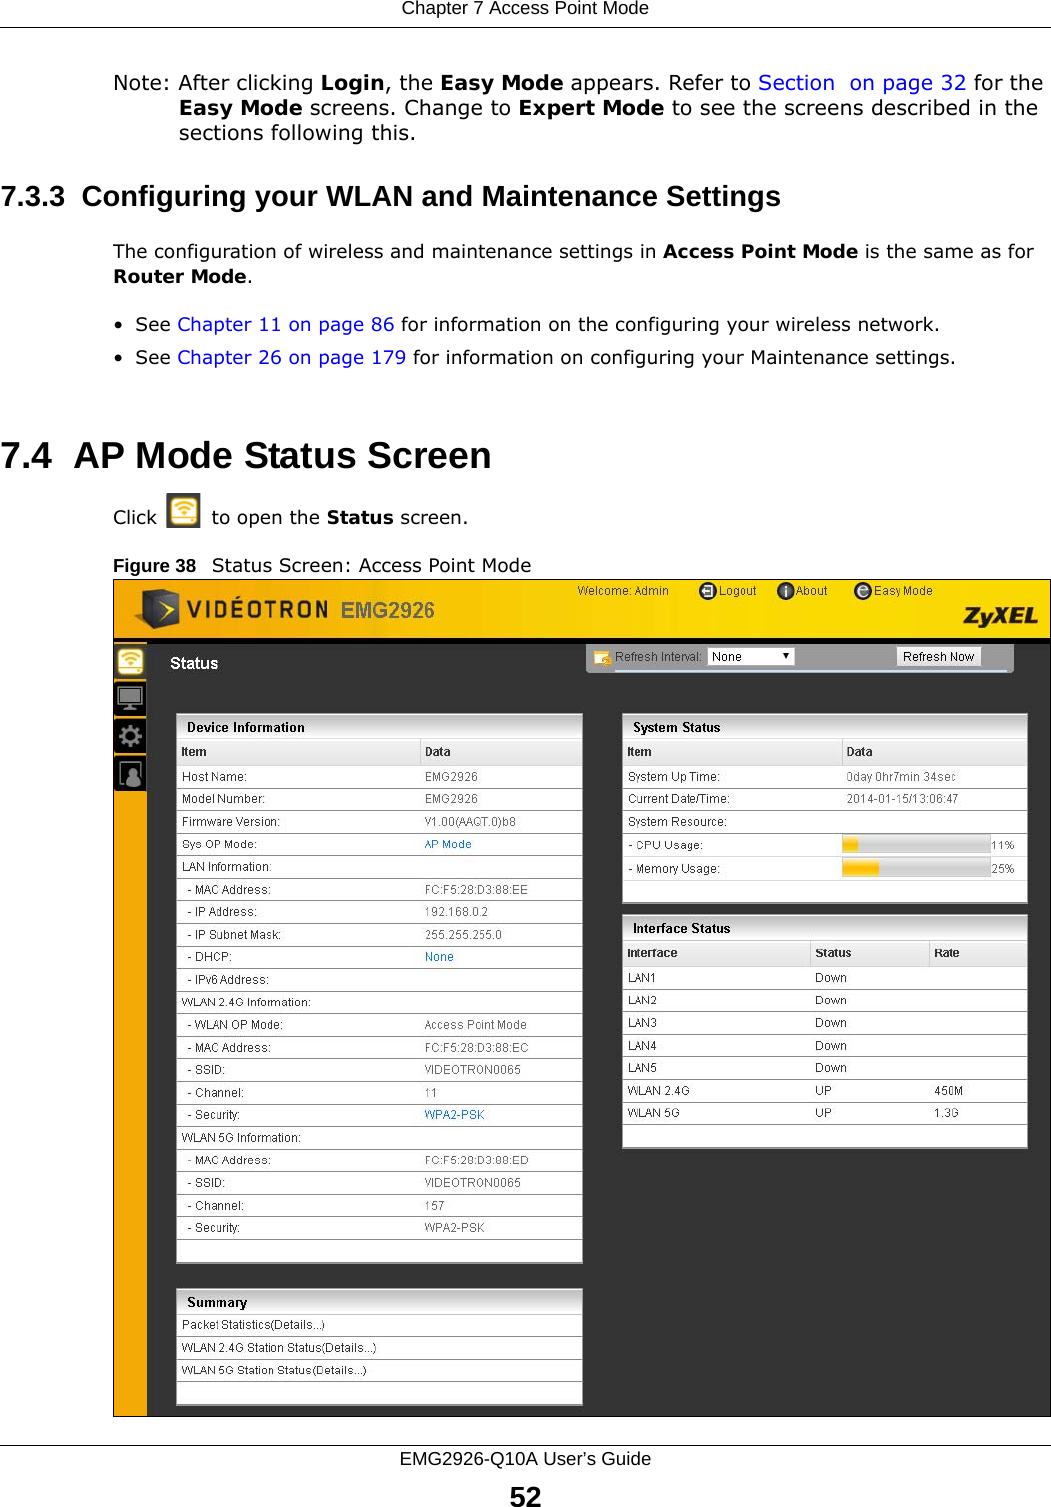 Chapter 7 Access Point ModeEMG2926-Q10A User’s Guide52Note: After clicking Login, the Easy Mode appears. Refer to Section  on page 32 for the Easy Mode screens. Change to Expert Mode to see the screens described in the sections following this.7.3.3  Configuring your WLAN and Maintenance SettingsThe configuration of wireless and maintenance settings in Access Point Mode is the same as for Router Mode.•See Chapter 11 on page 86 for information on the configuring your wireless network.•See Chapter 26 on page 179 for information on configuring your Maintenance settings. 7.4  AP Mode Status ScreenClick   to open the Status screen. Figure 38   Status Screen: Access Point Mode 